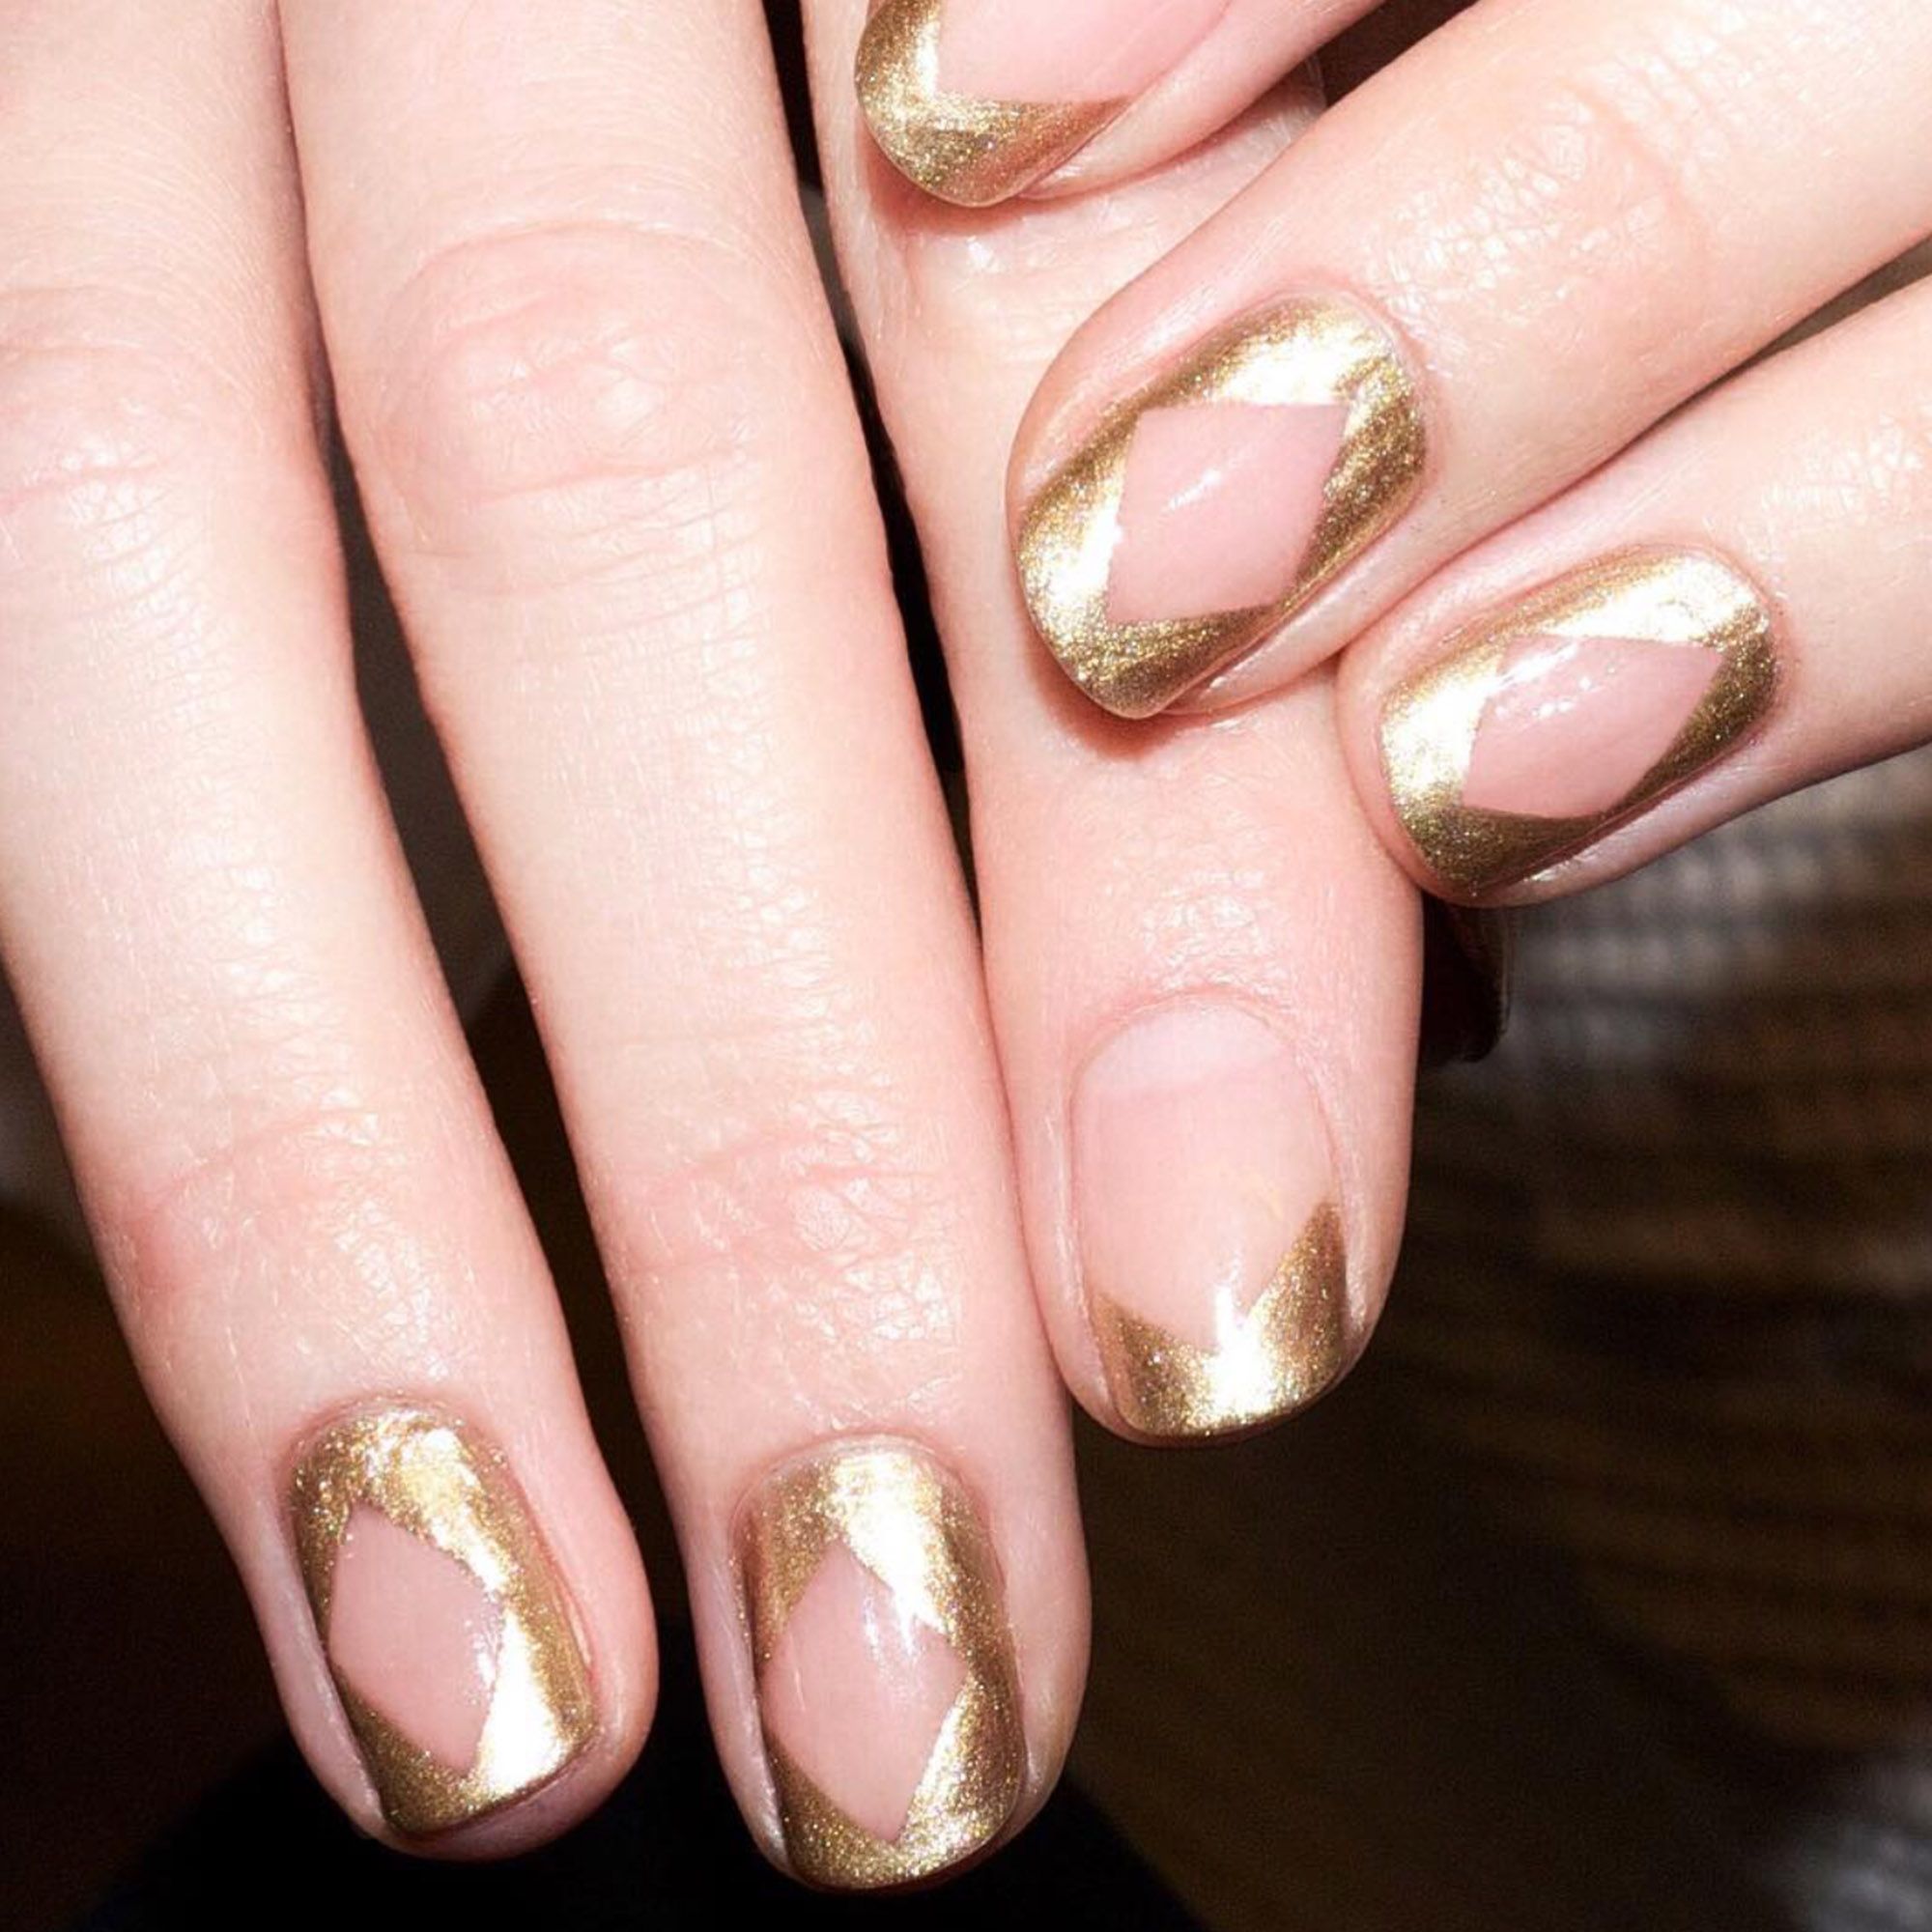 Is This $25,000 Manicure Worth It?